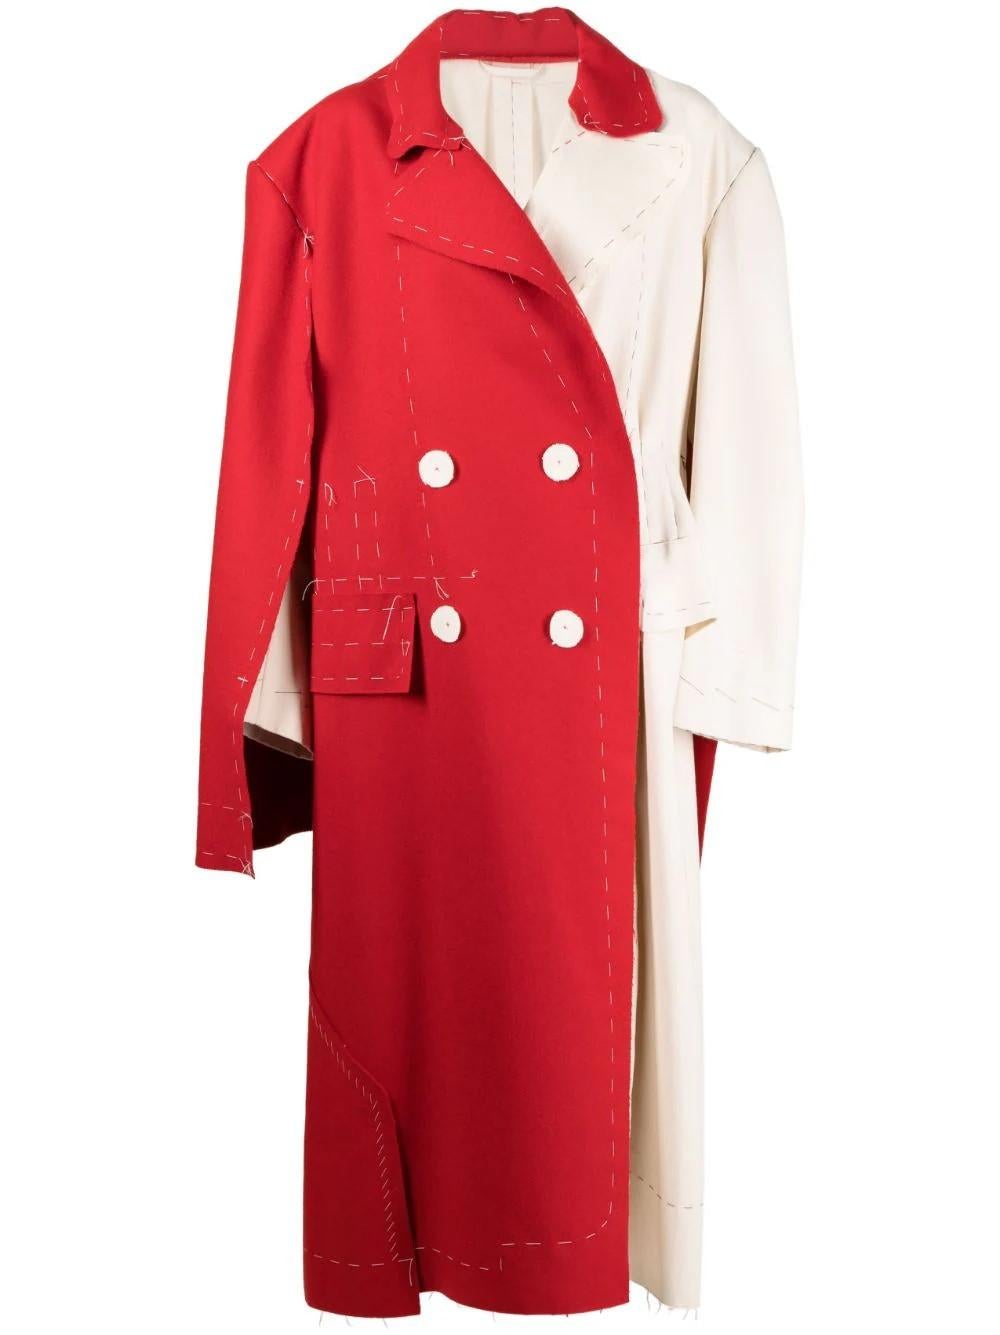 Maison Margiela Deconstructed Coat In Excellent Condition For Sale In London, GB